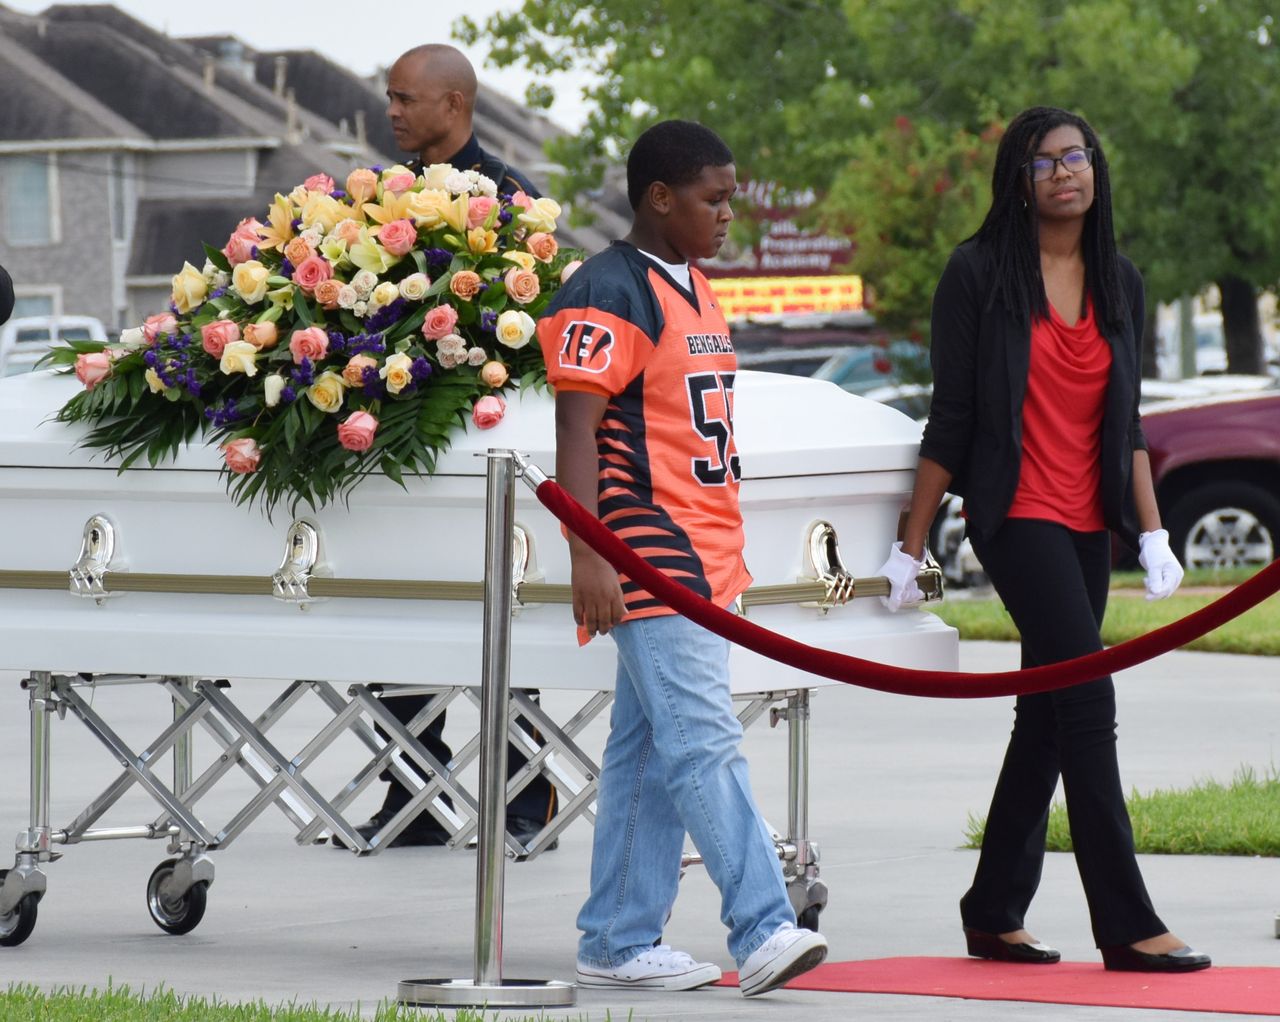 David Conley is accused of killing his former girlfriend, her husband and six children in a mass shooting. A former teammate and fellow student help escort the casket of one of the children.